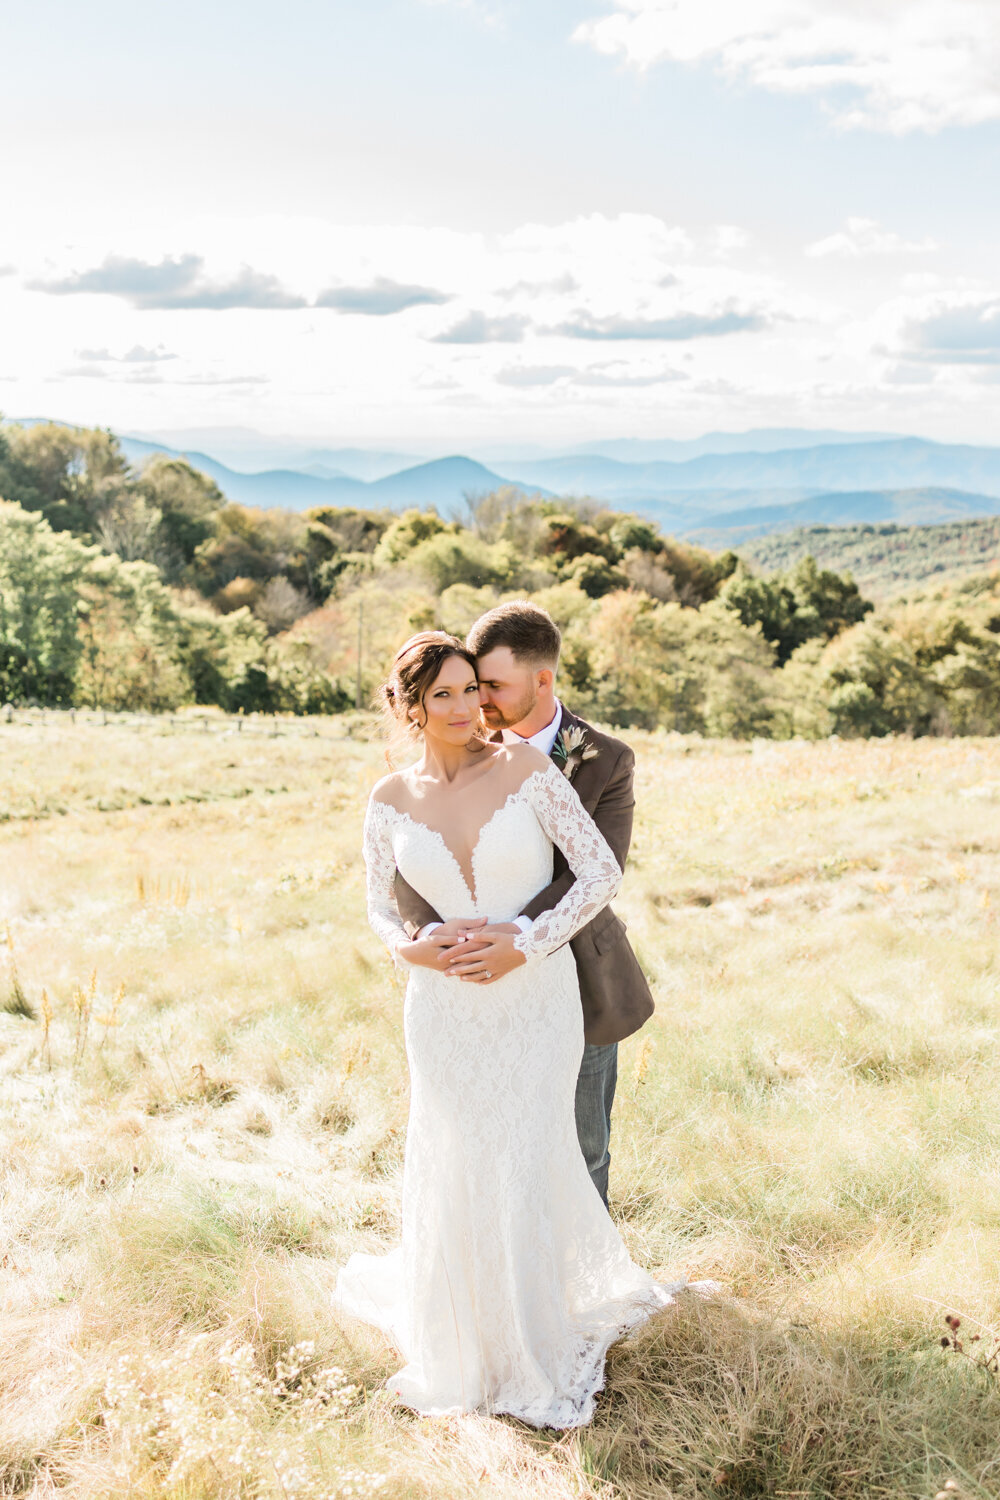 Max-Patch-Elopement-Session-Willow-And-Rove-19